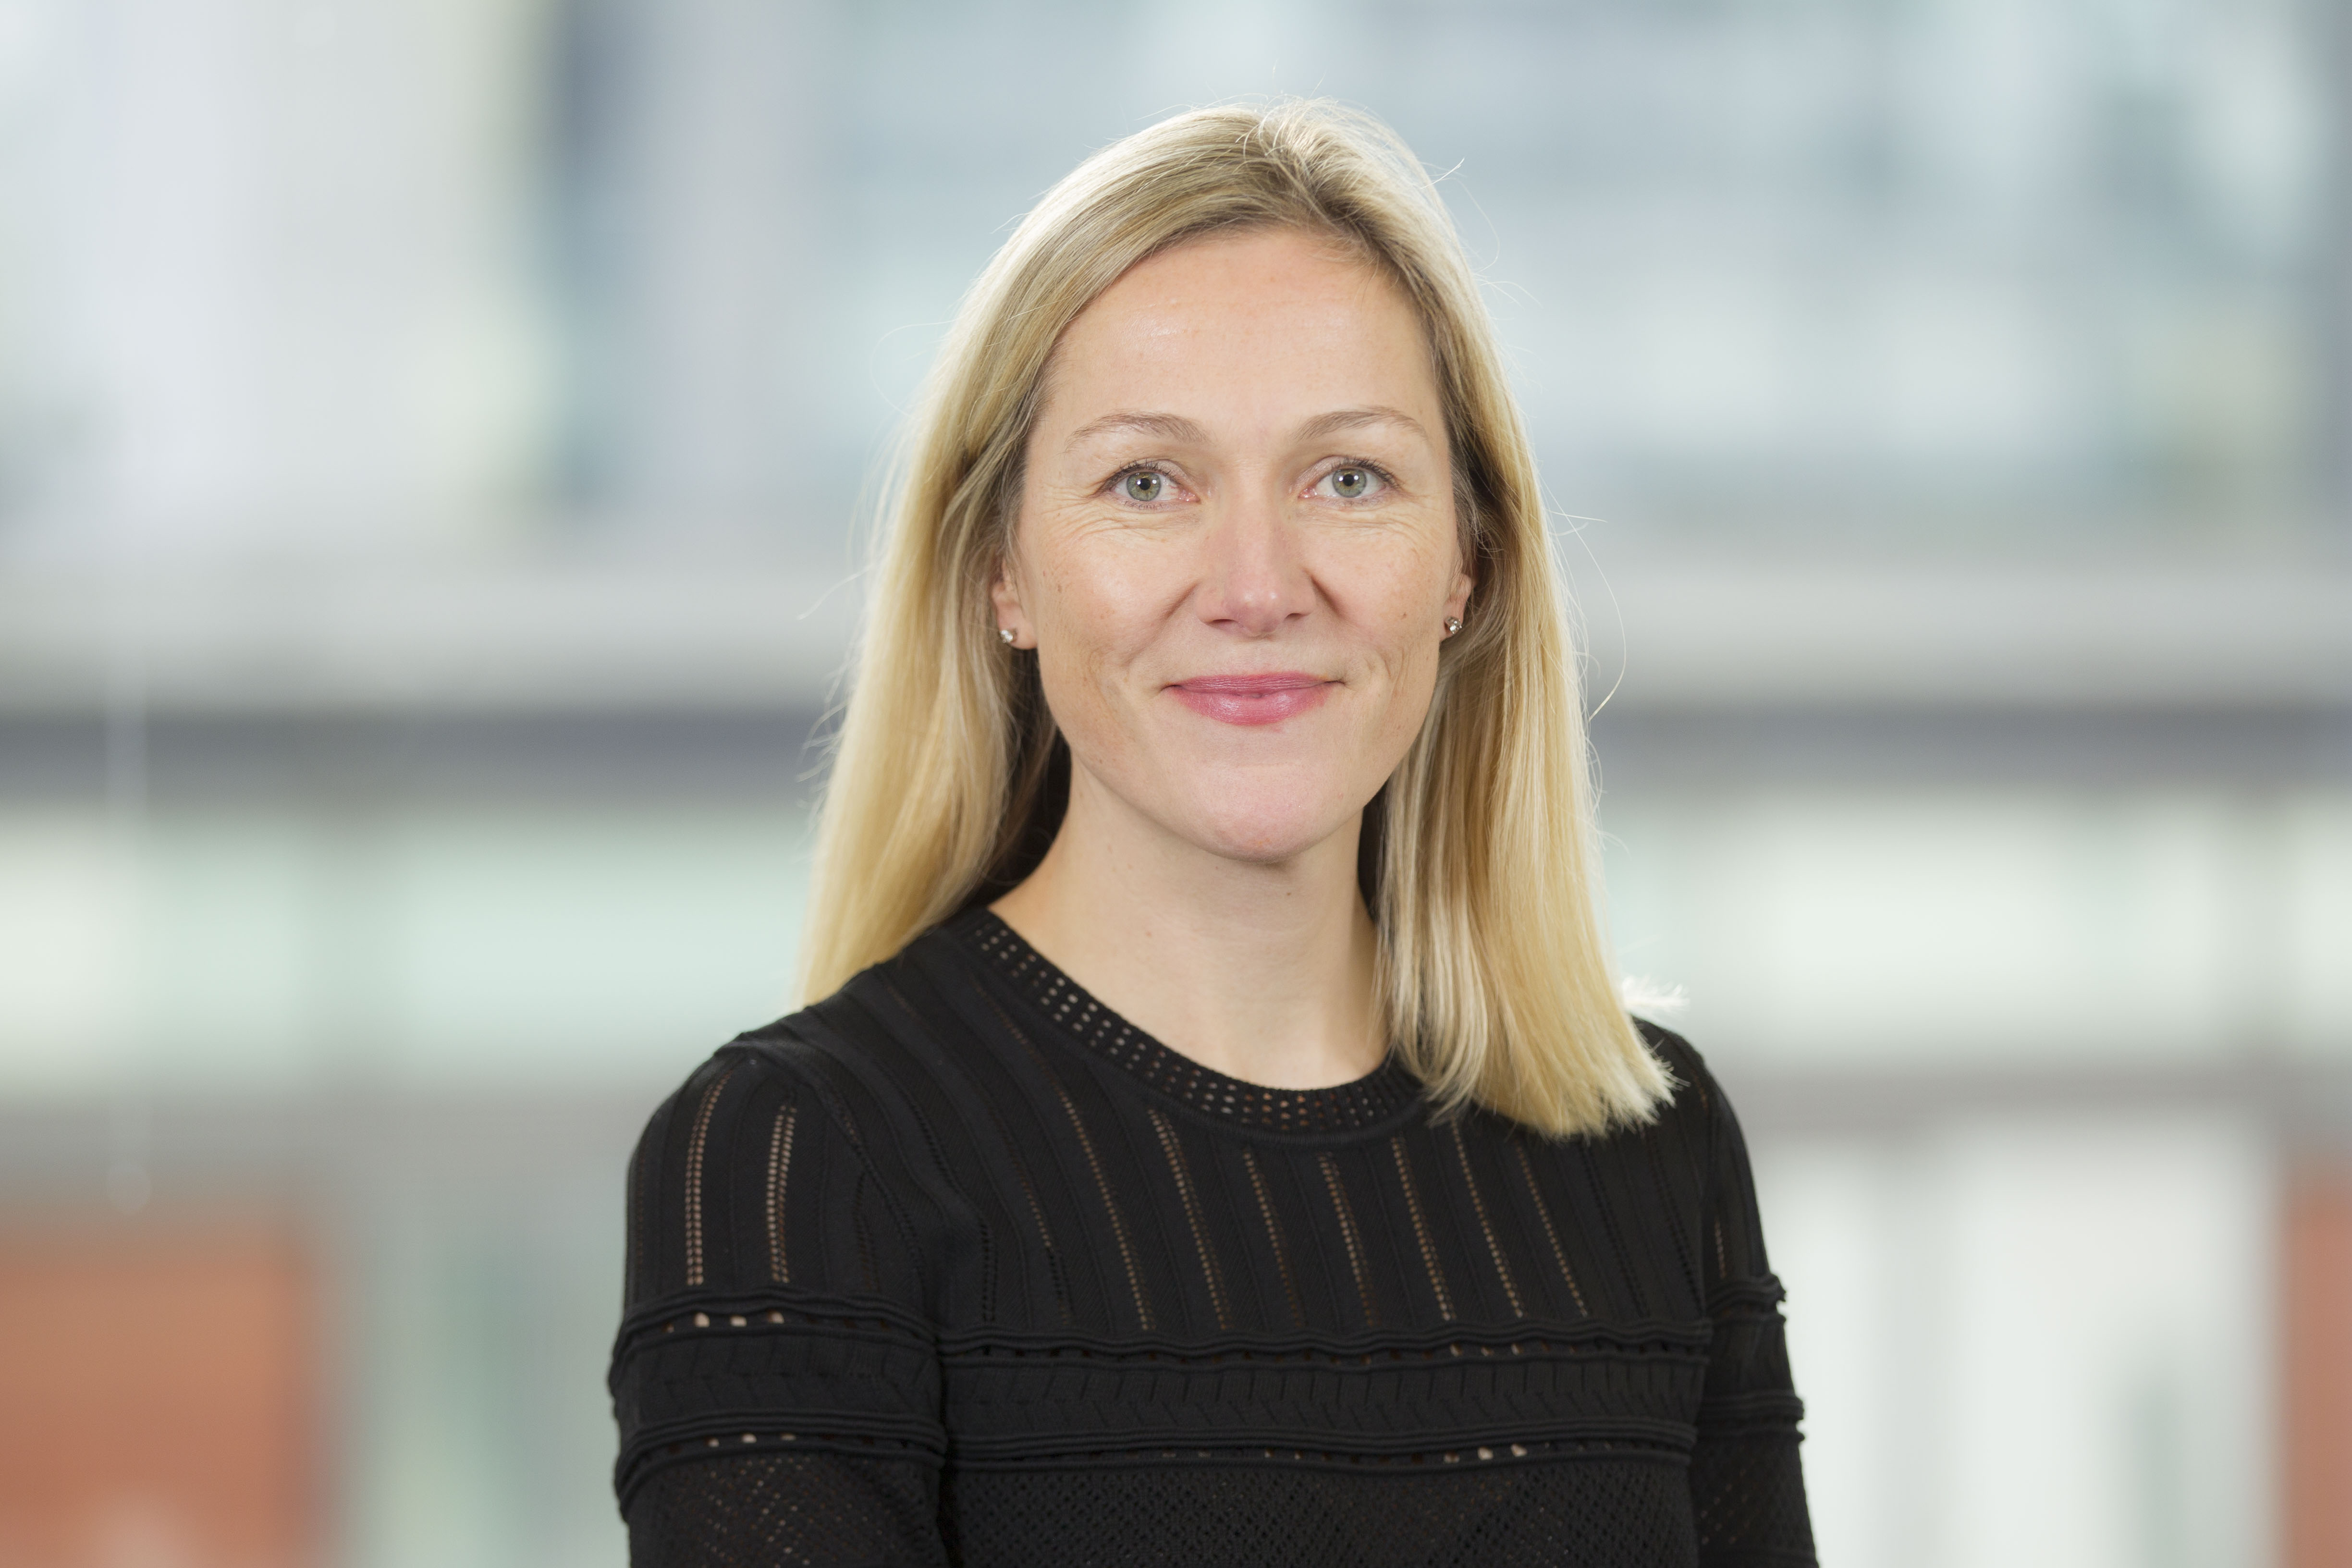 Claire Reid of PwC is excited to make a difference